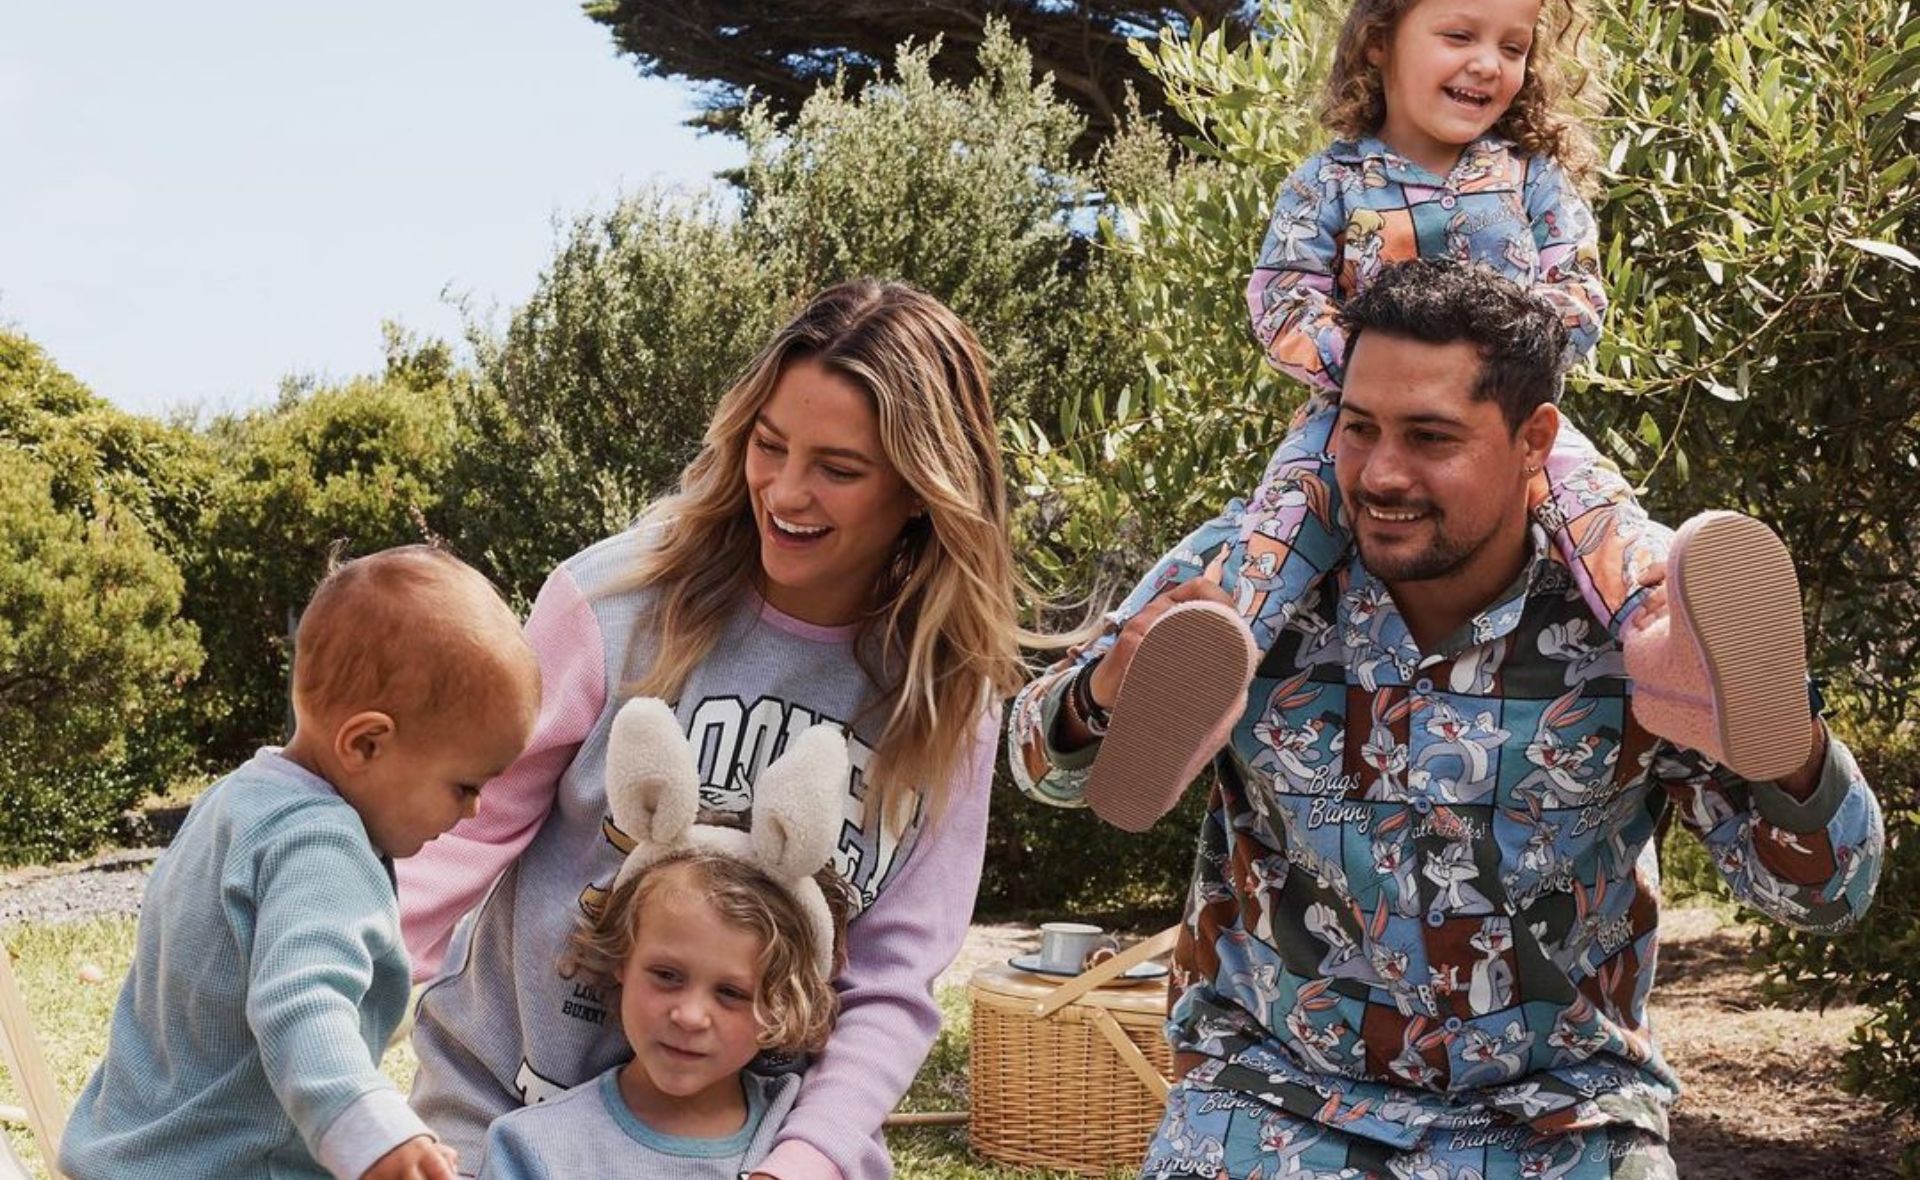 Hop to it and get in the Easter spirit with these matching pyjamas for the whole family